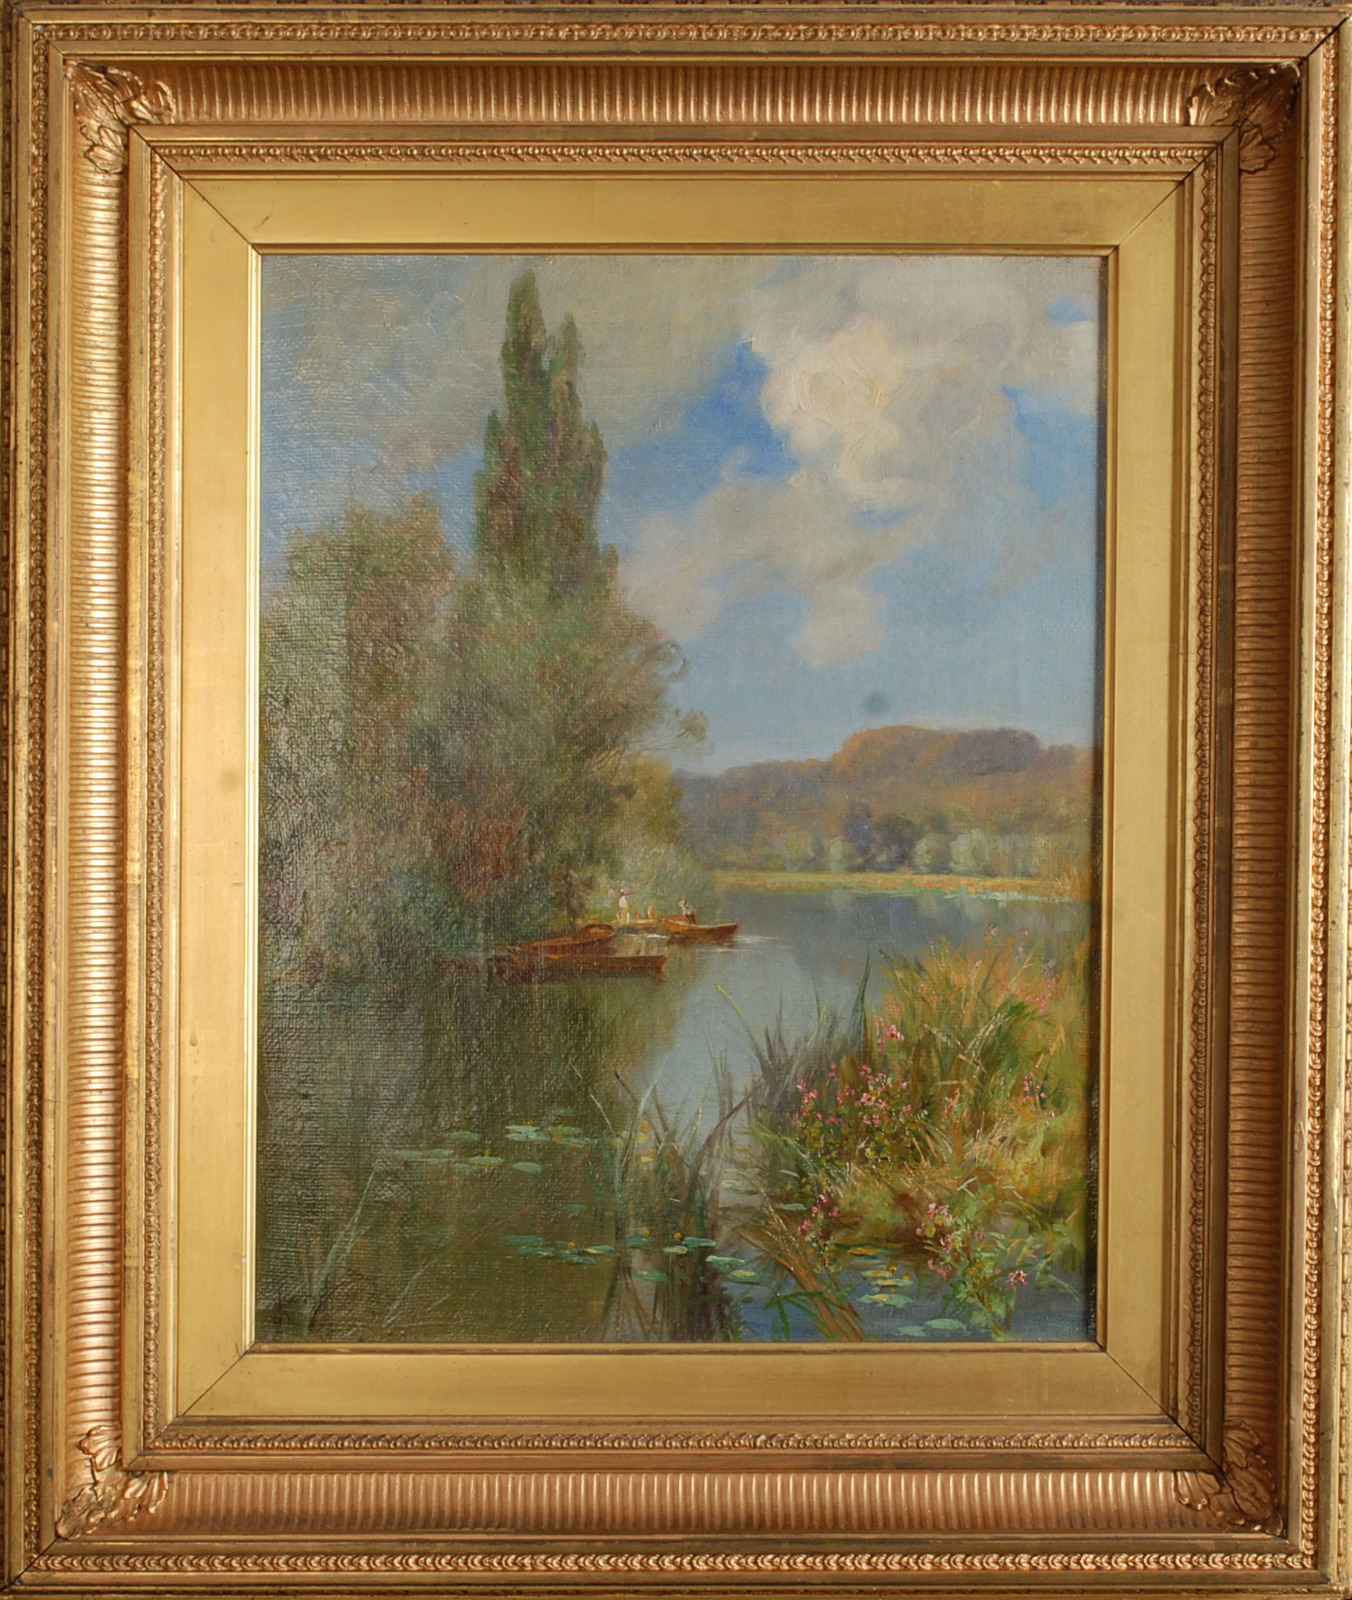 HARRY WILLIAM ADAMS Boating On A River Oil on canvas Signed and dated Labels on the back 1901 46 x - Image 2 of 4